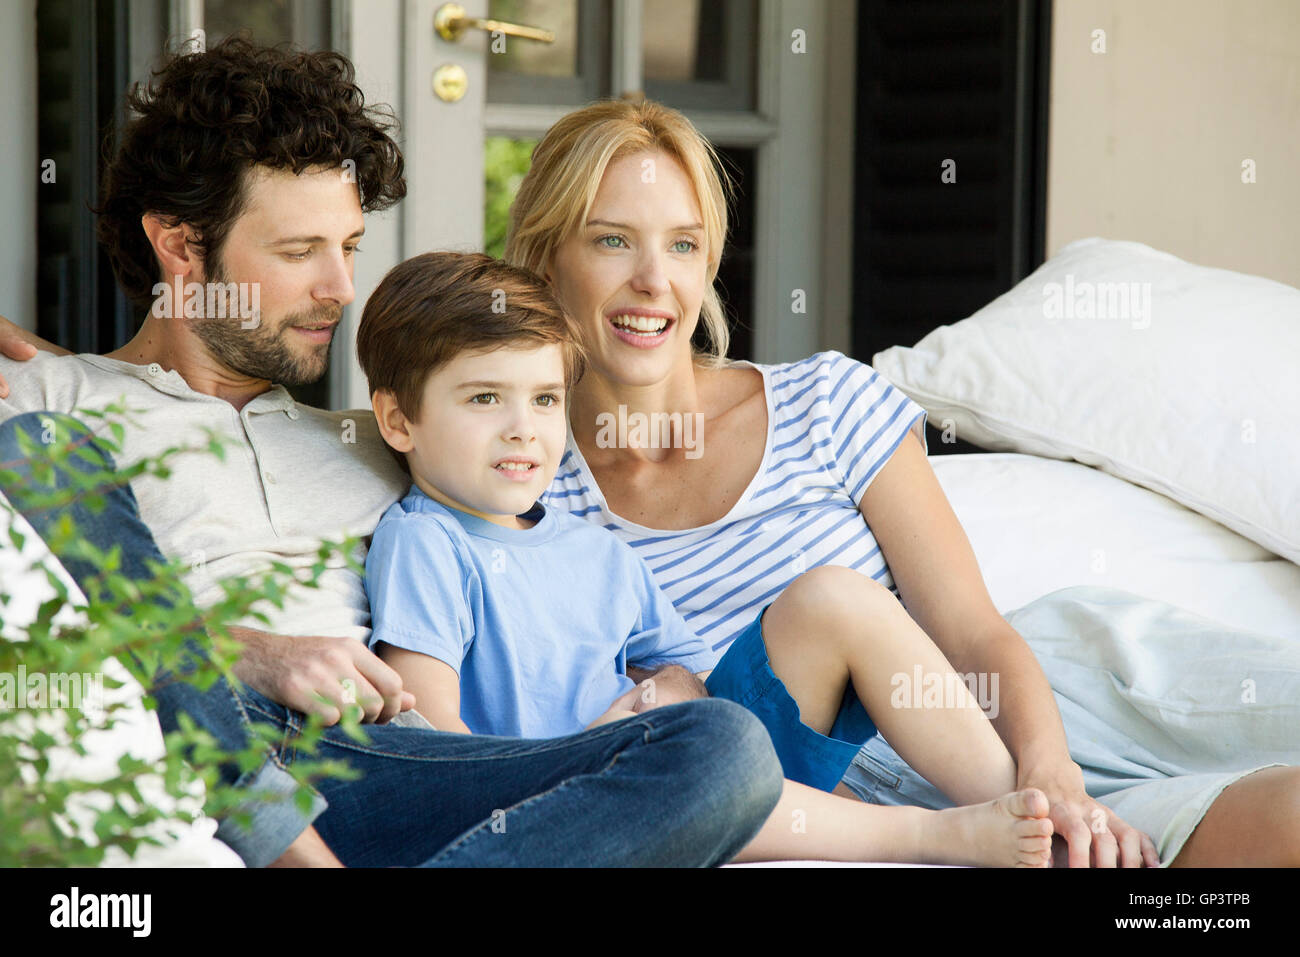 Family with one child relaxing together outdoors Stock Photo